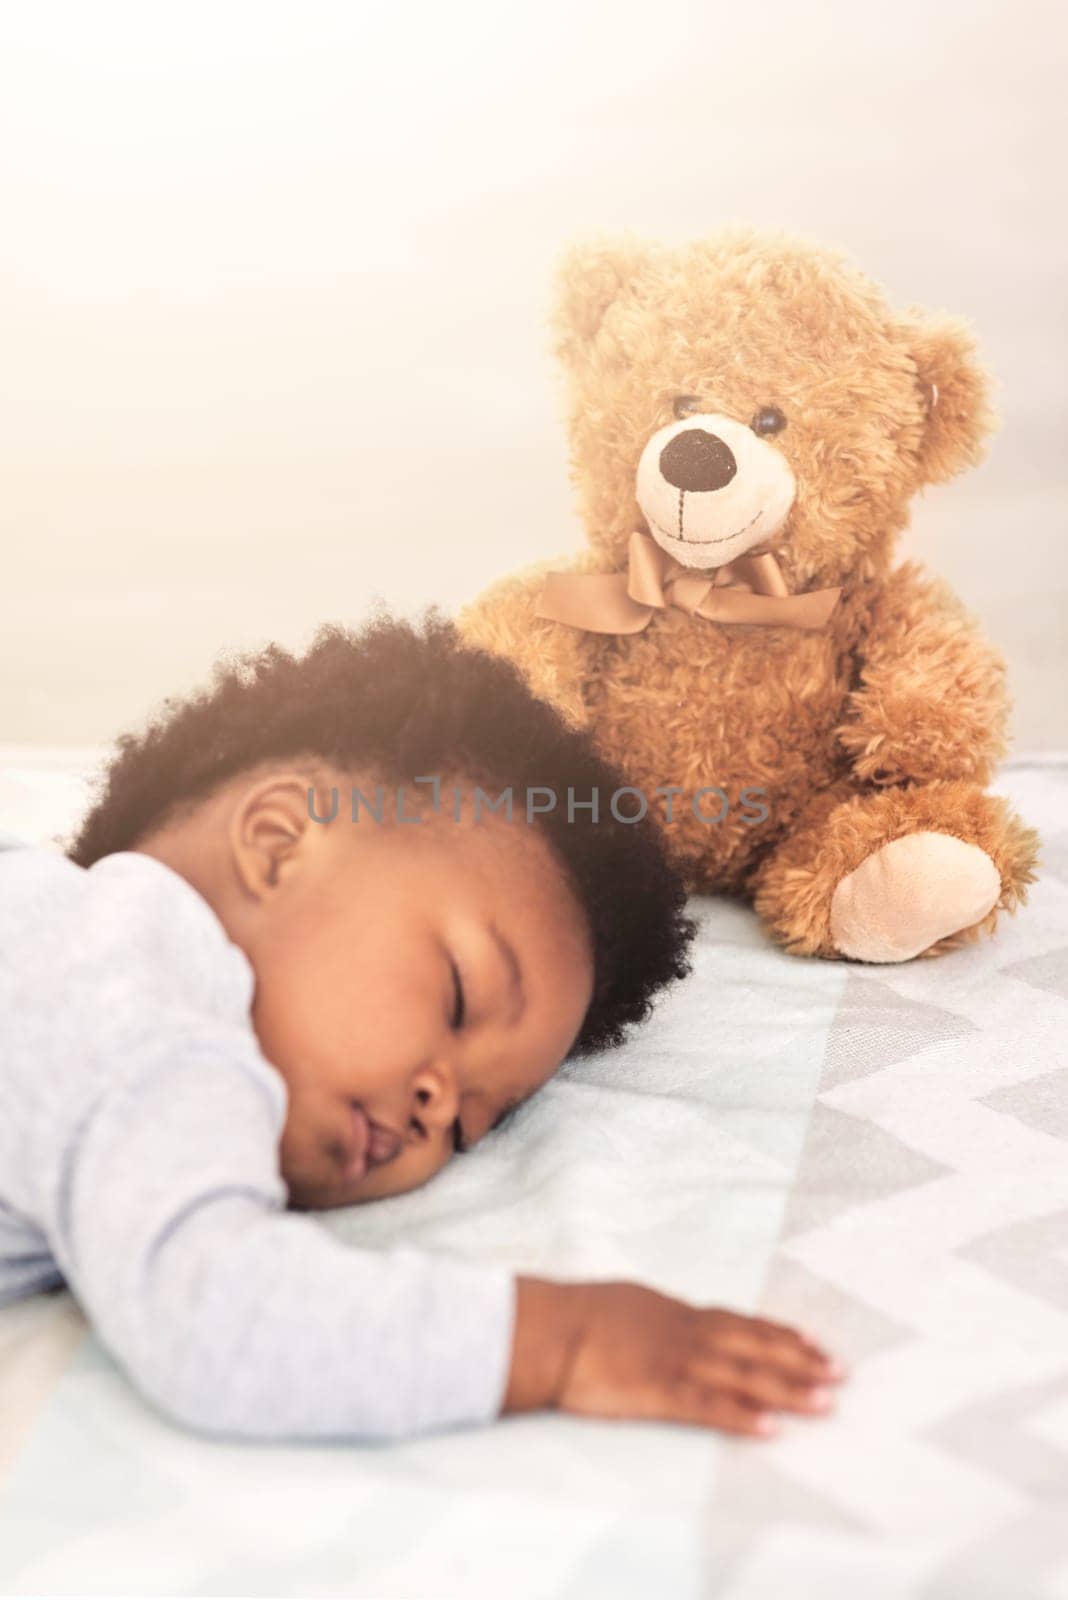 Sleeping, teddy bear and tired with baby in bedroom for carefree, development and innocence. Dreaming, relax and comfortable with african infant and toy at home for morning, resting and bedtime by YuriArcurs